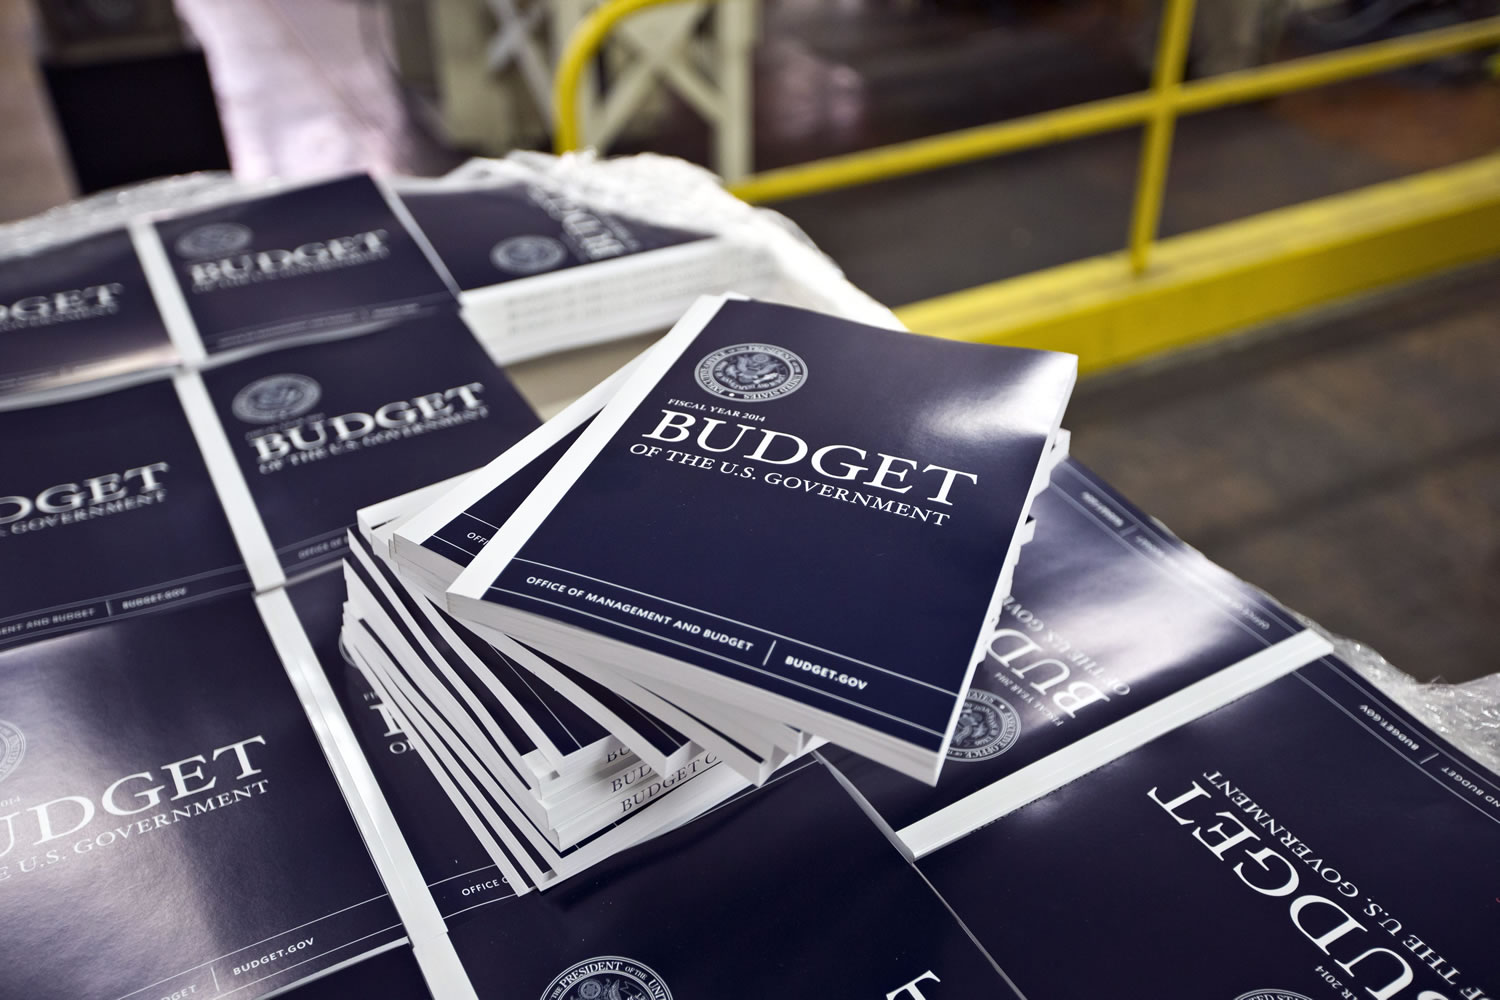 Copies of President Barack Obama's budget plan for fiscal year 2014 are prepared for delivery Monday at the U.S. Government Printing Office in Washington.